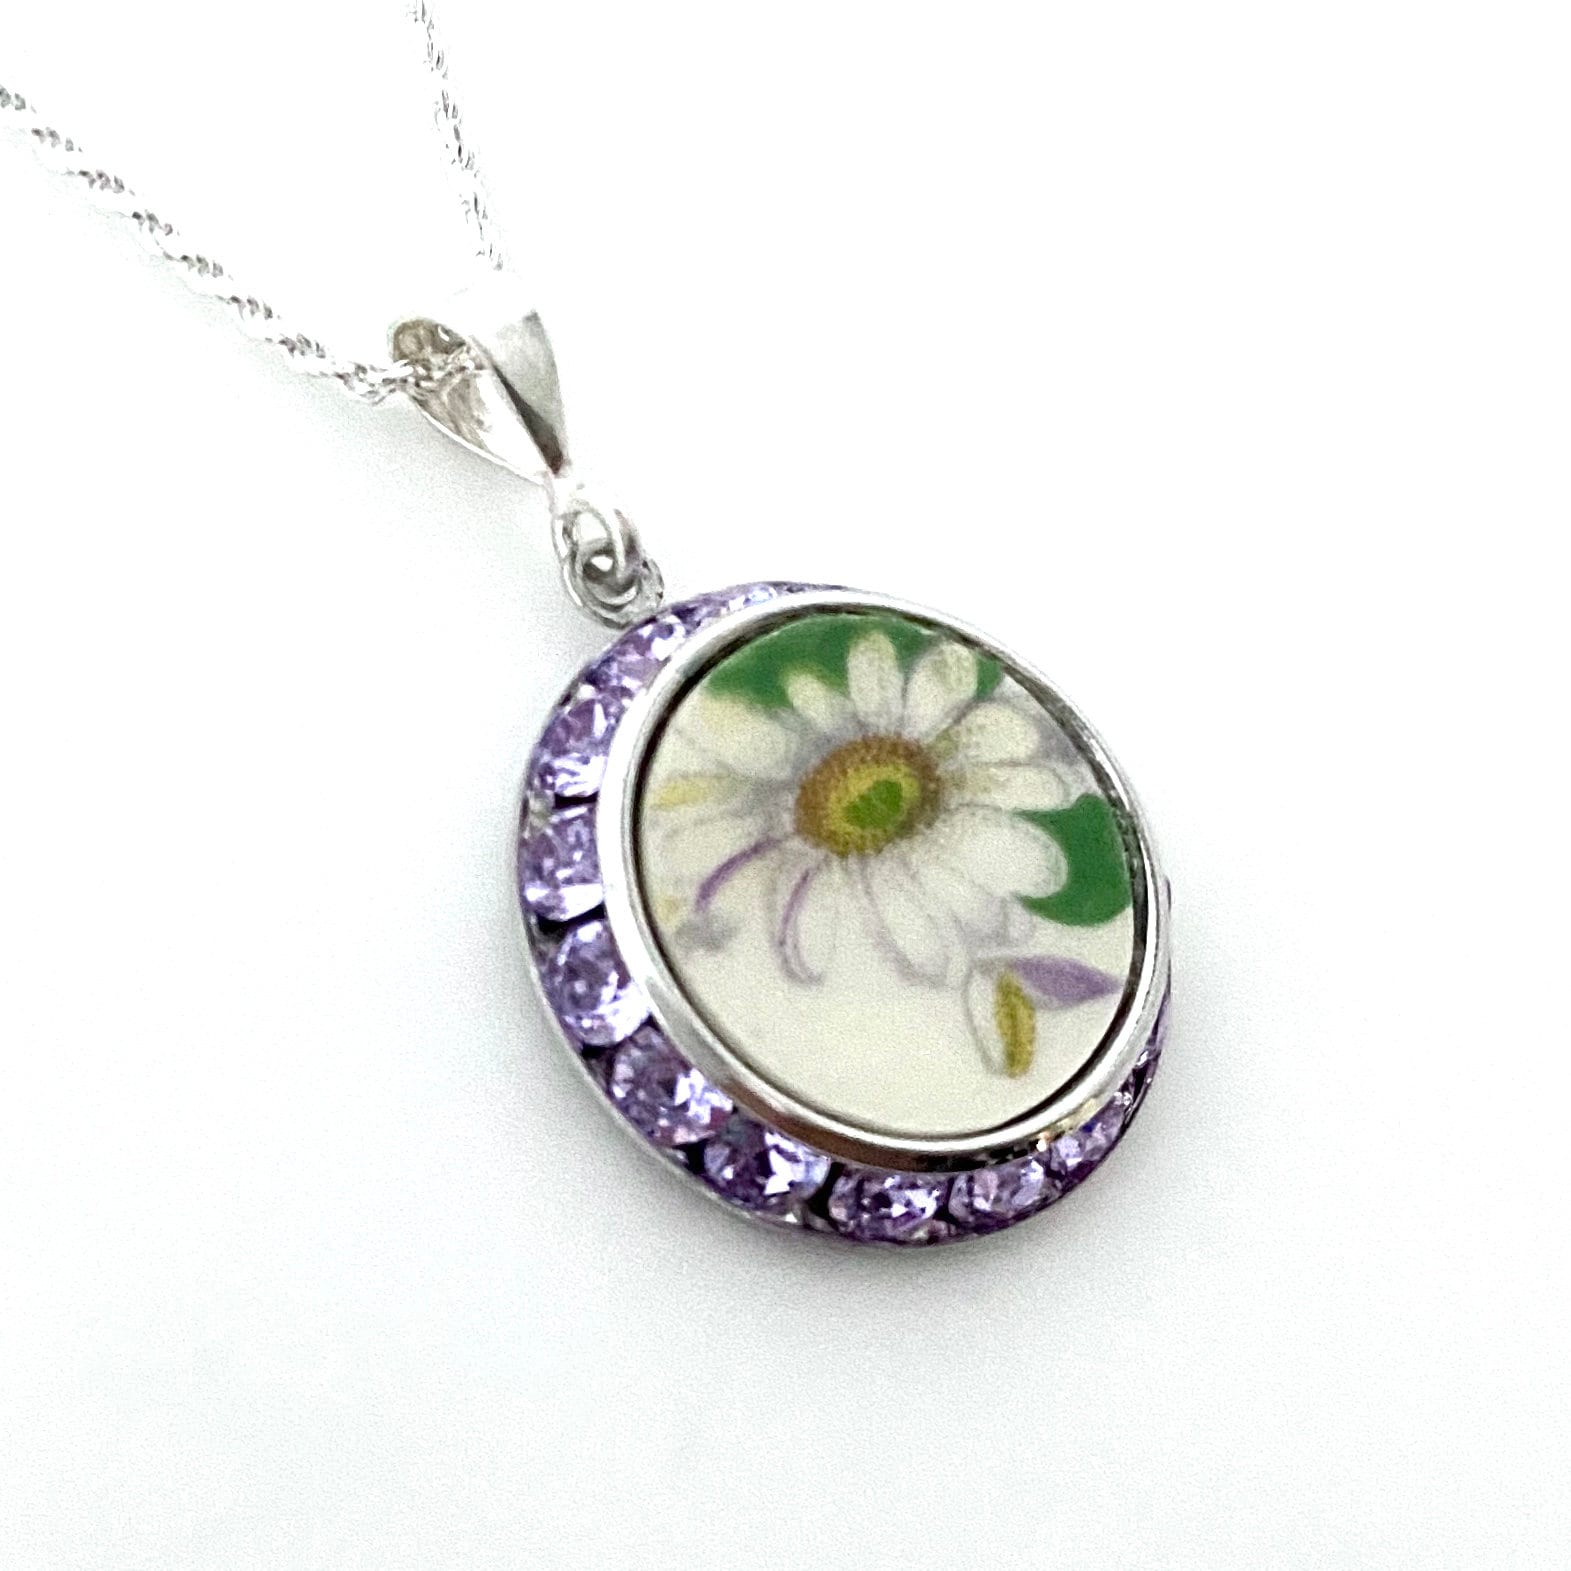 Broken China Jewelry Daisy Pendant Necklace, Unique Gifts for Women, Crystal Jewelry